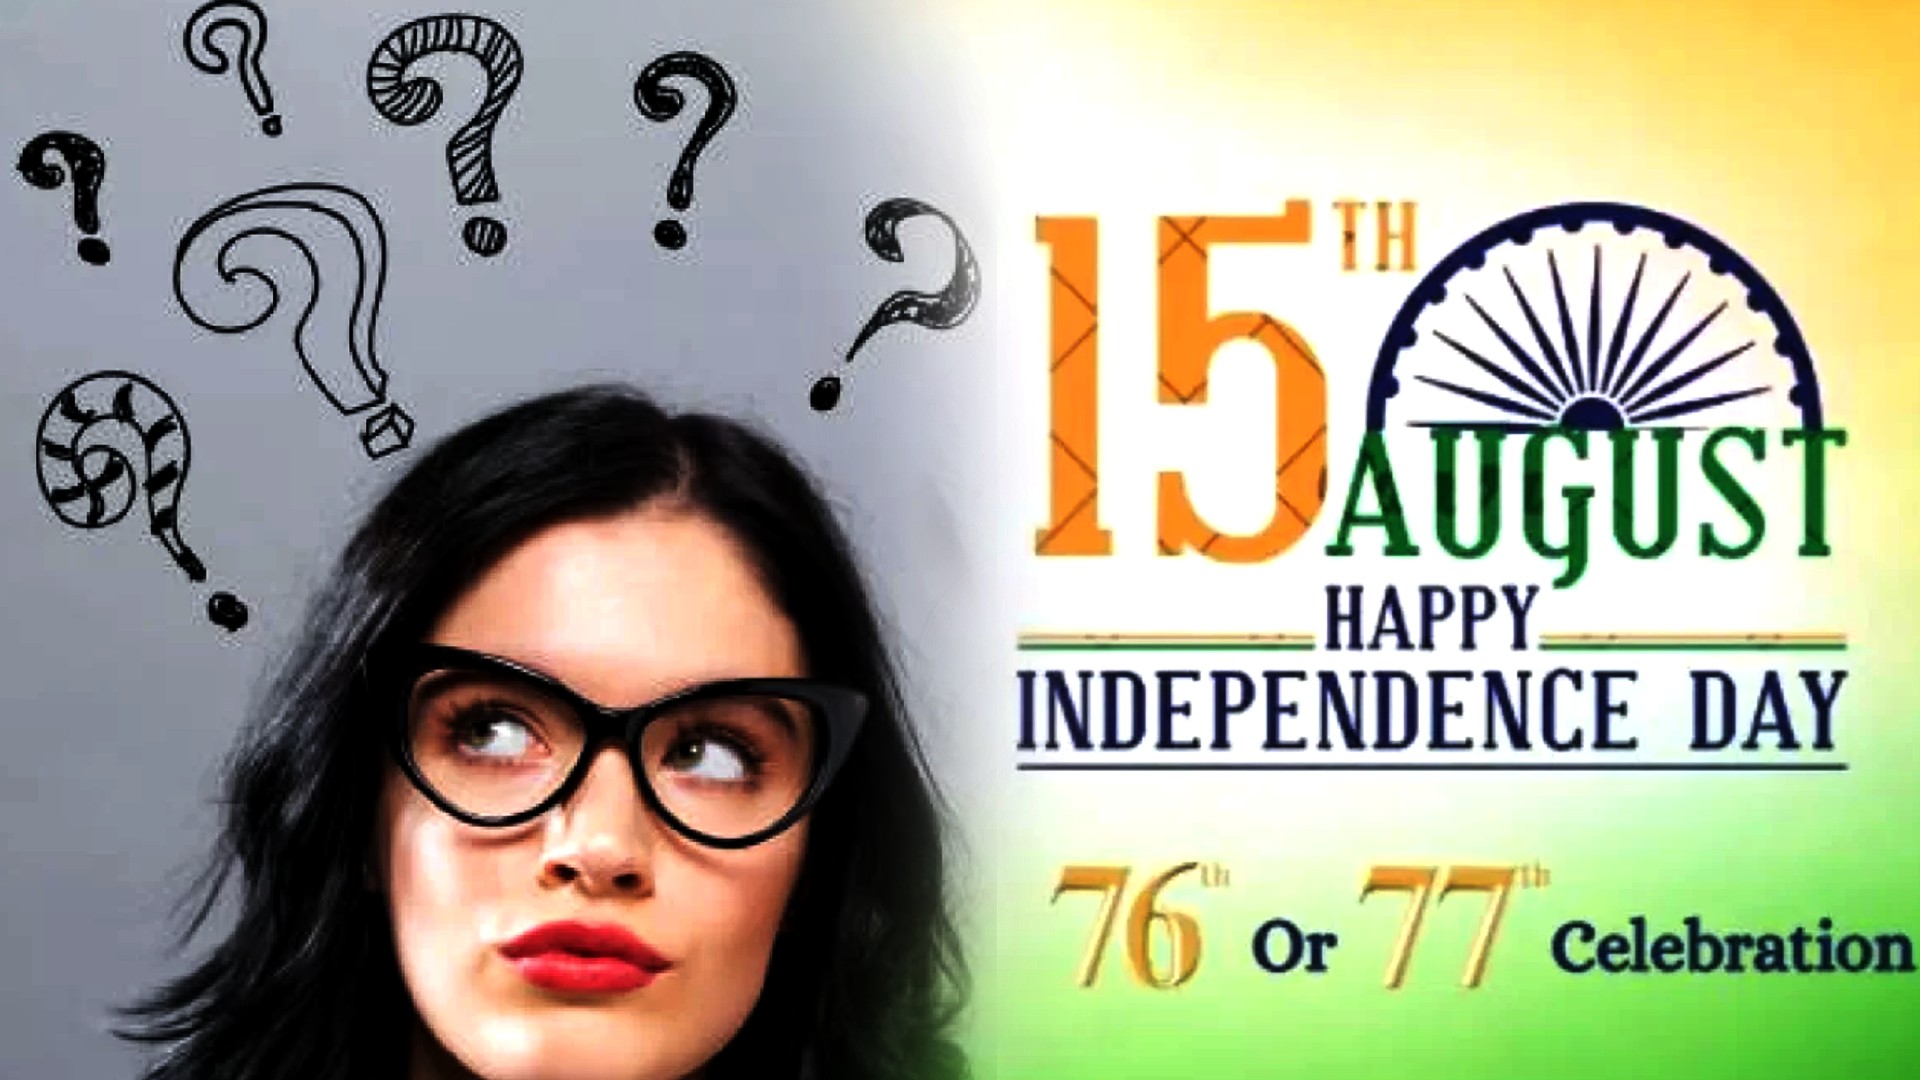 in 2023 indian independence day 76th or 77th know the facts